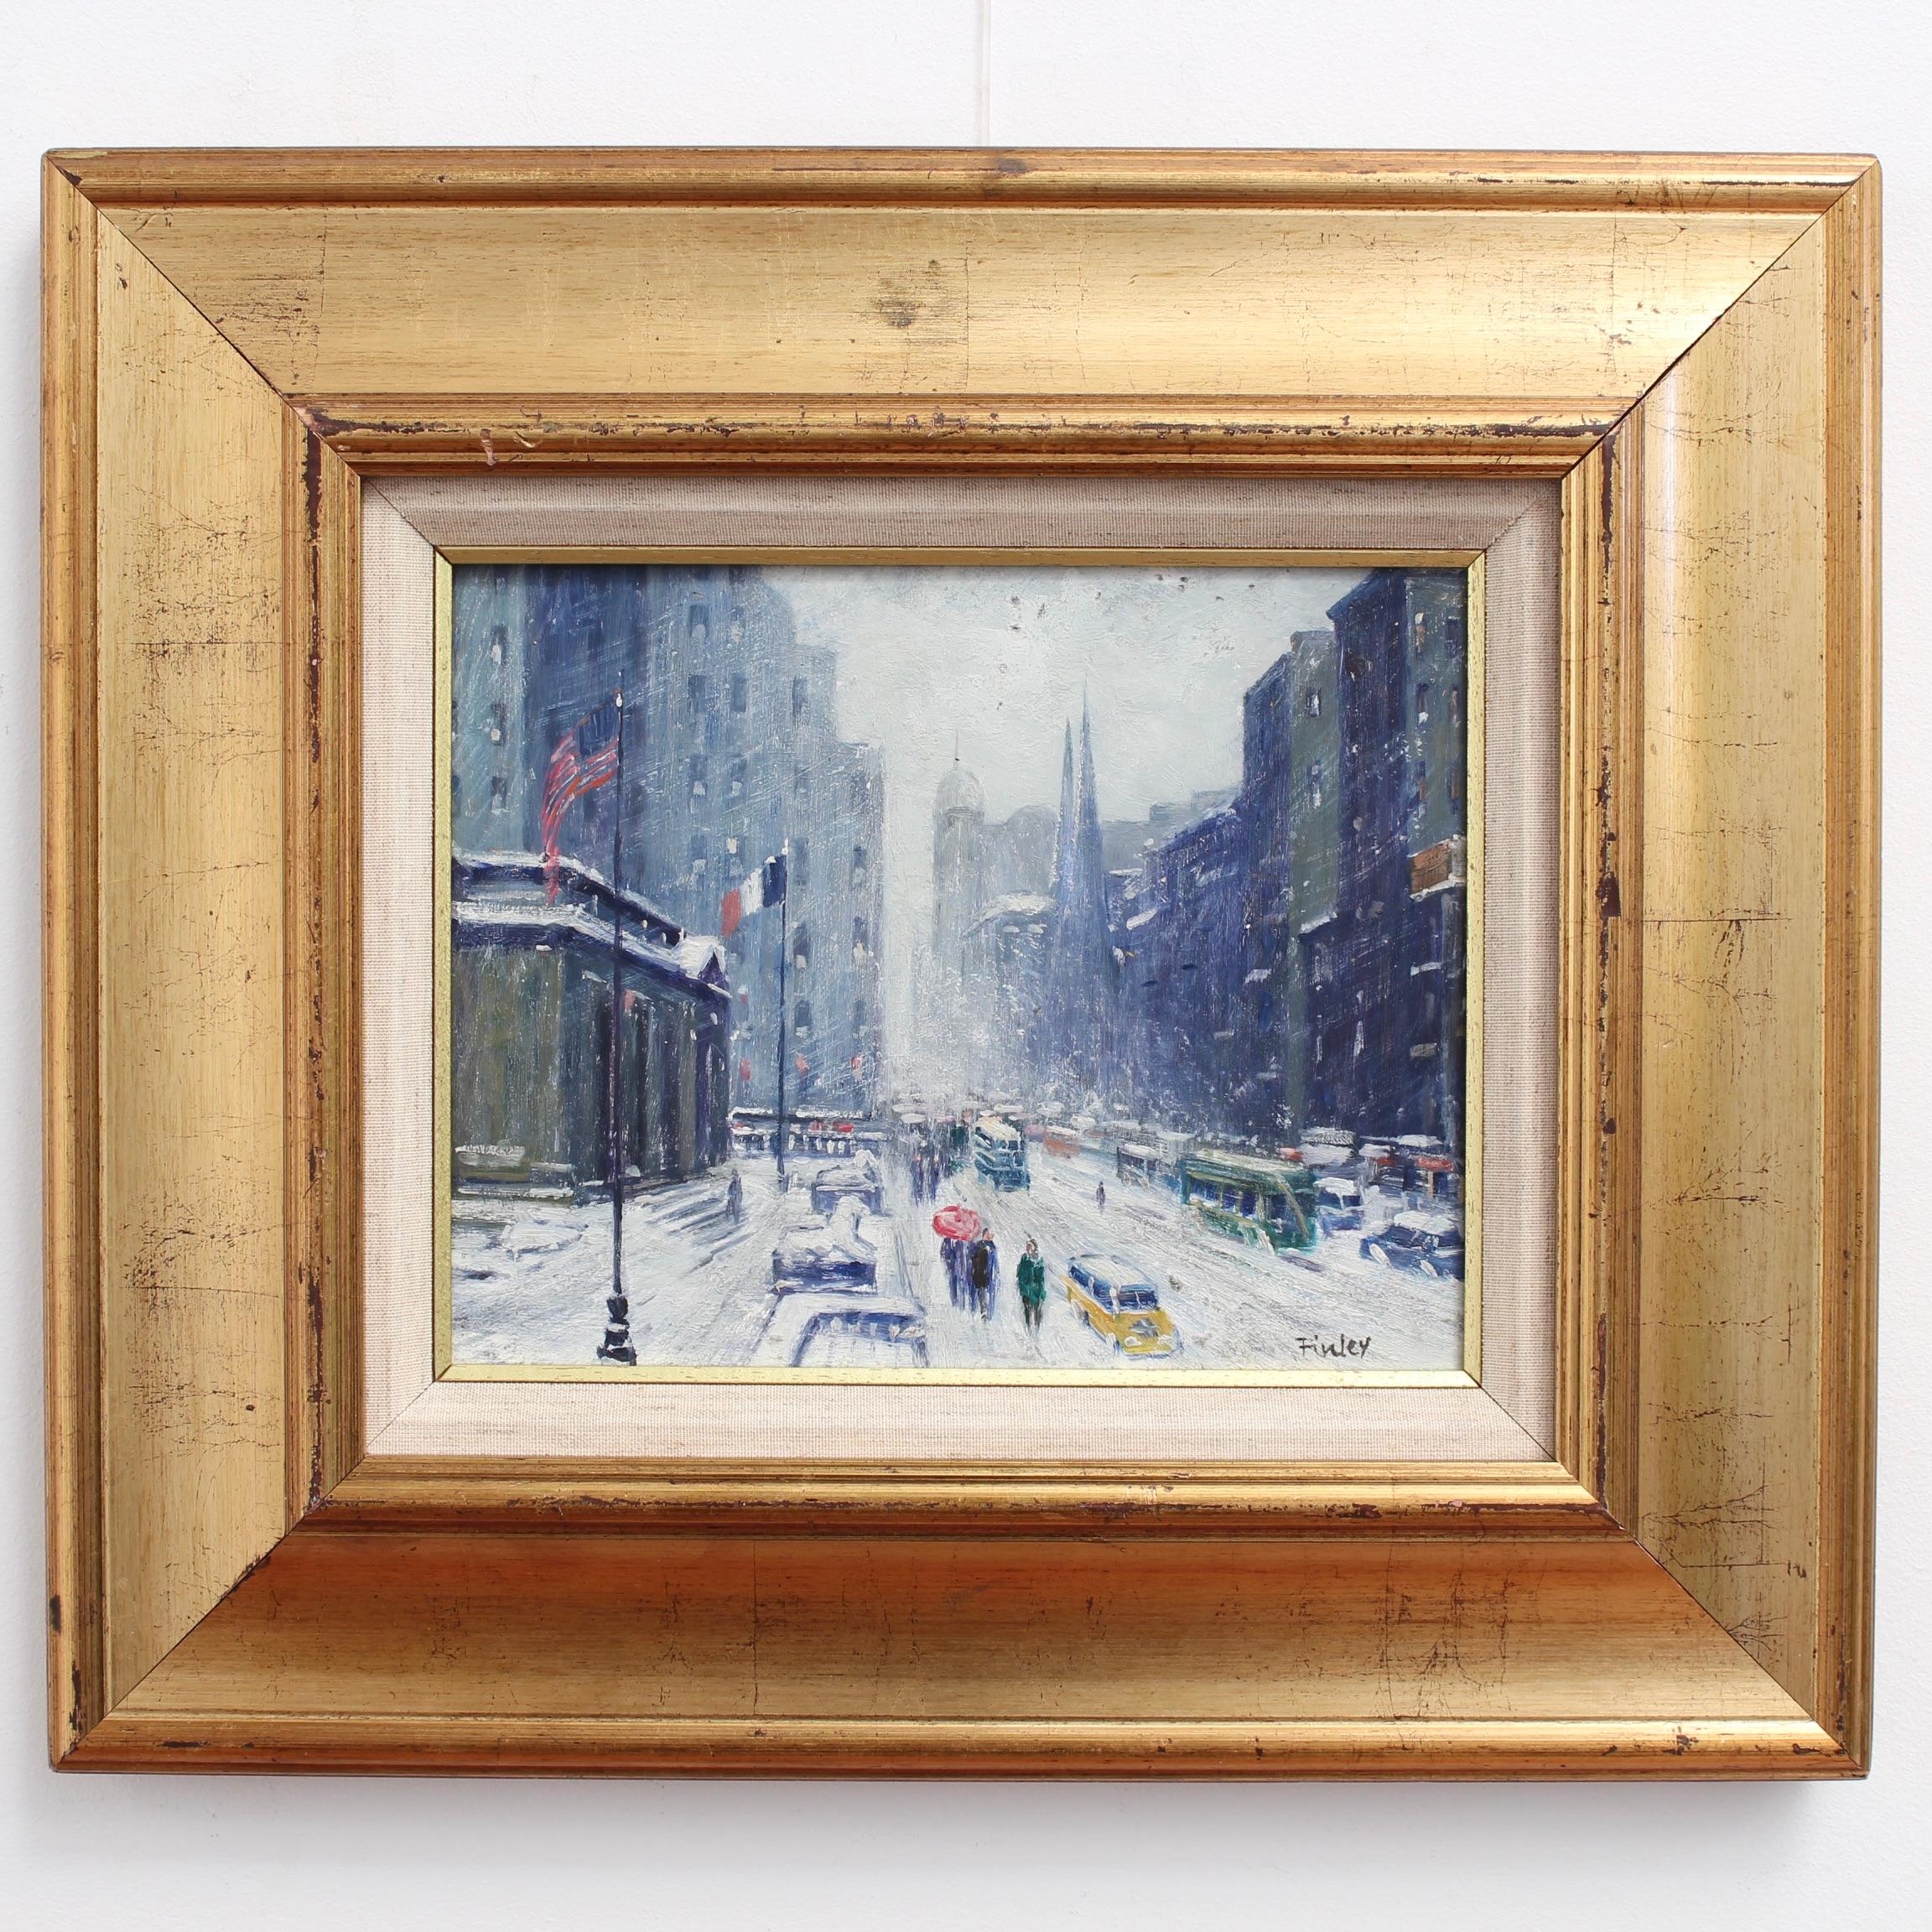 'New York Public Library Under Snow 1940s' by Finley - Painting by (After) Guy Carleton Wiggins